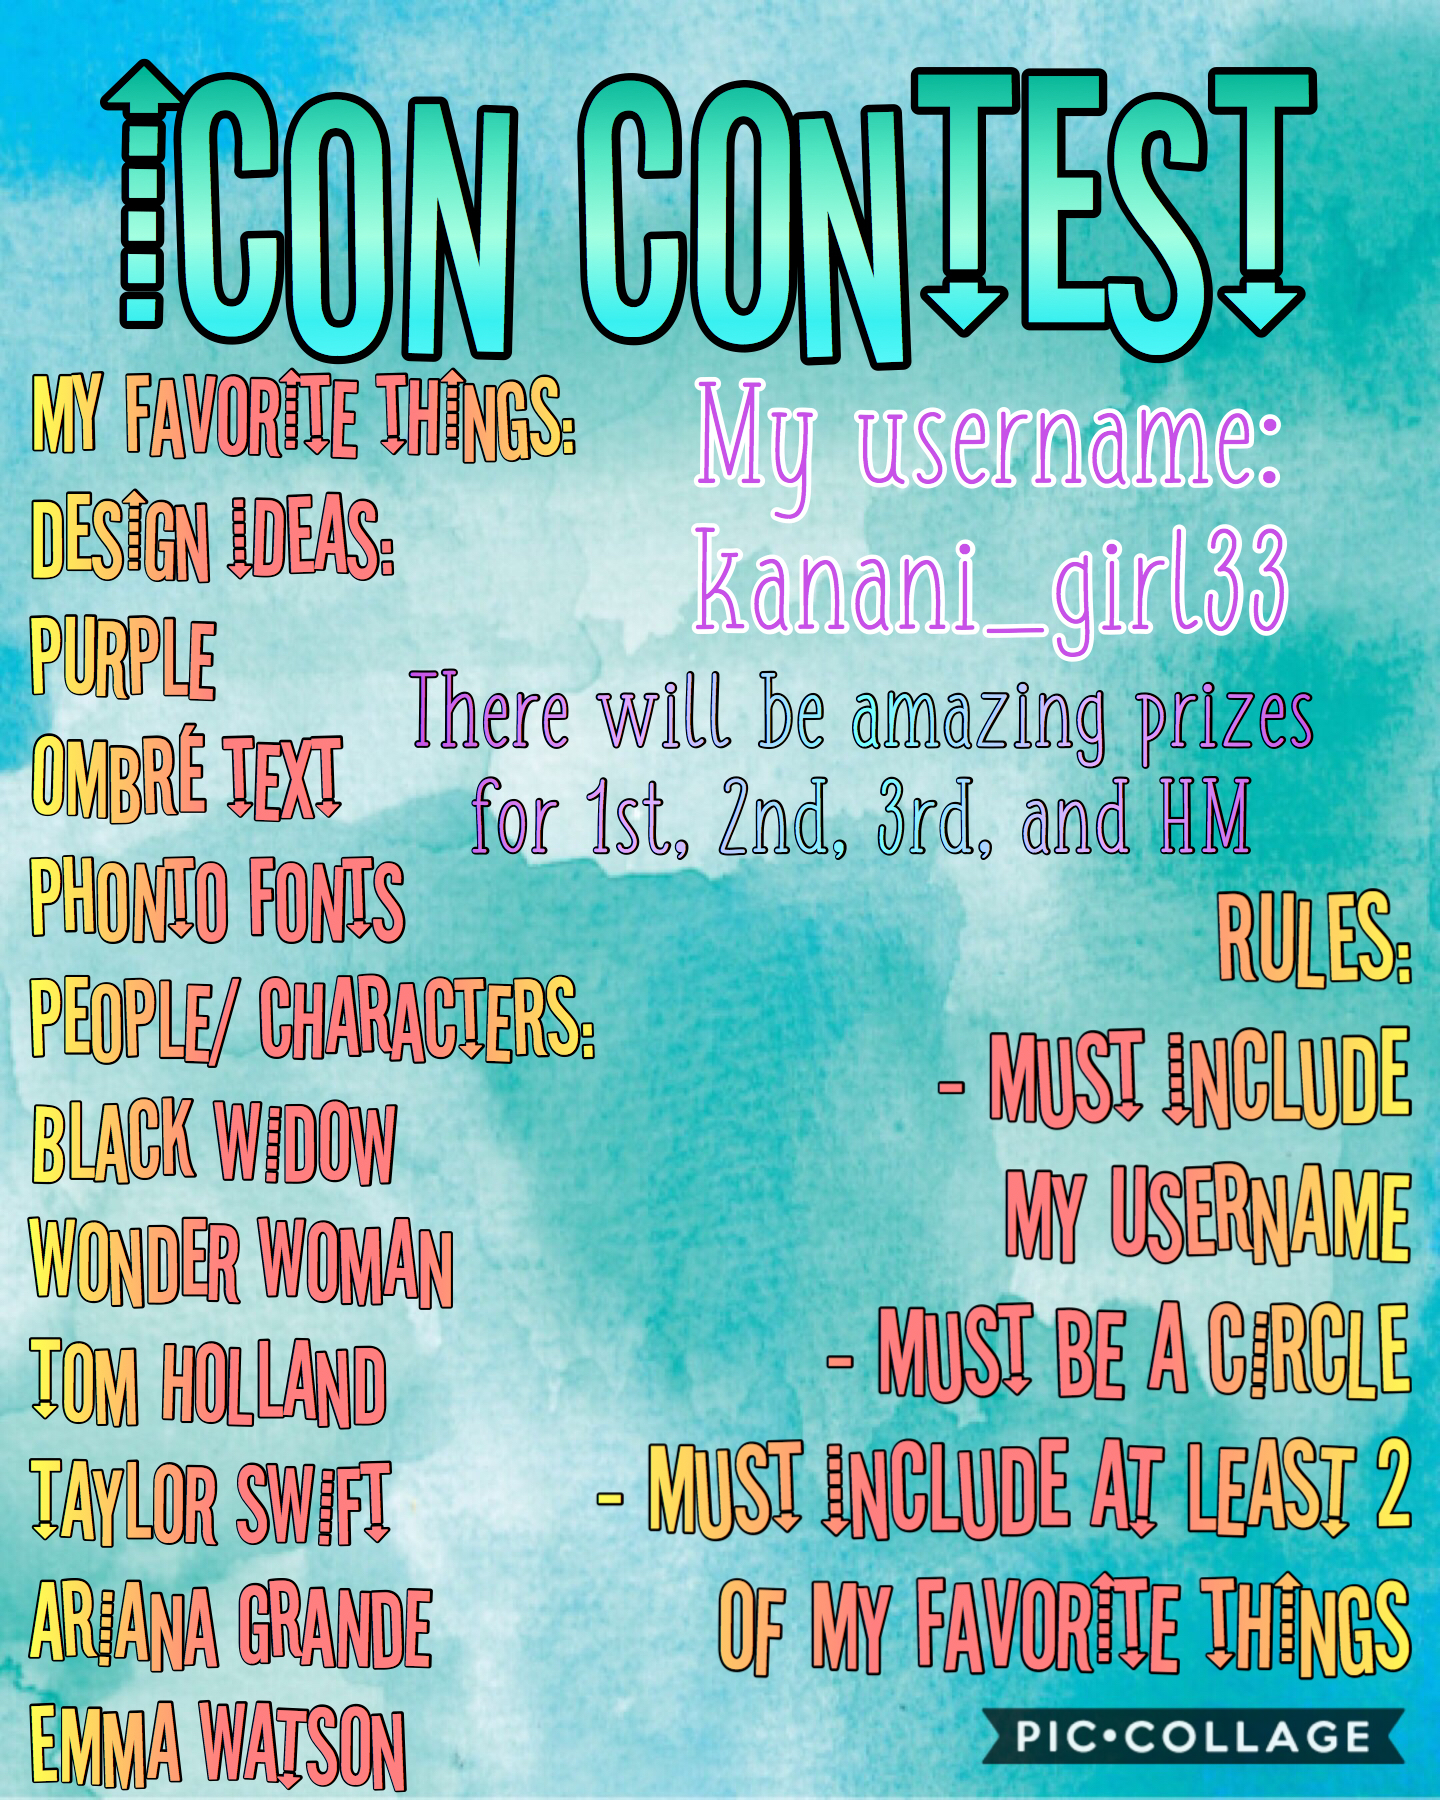 Good luck!! Due when I have enough entries!!! (probably by December) 